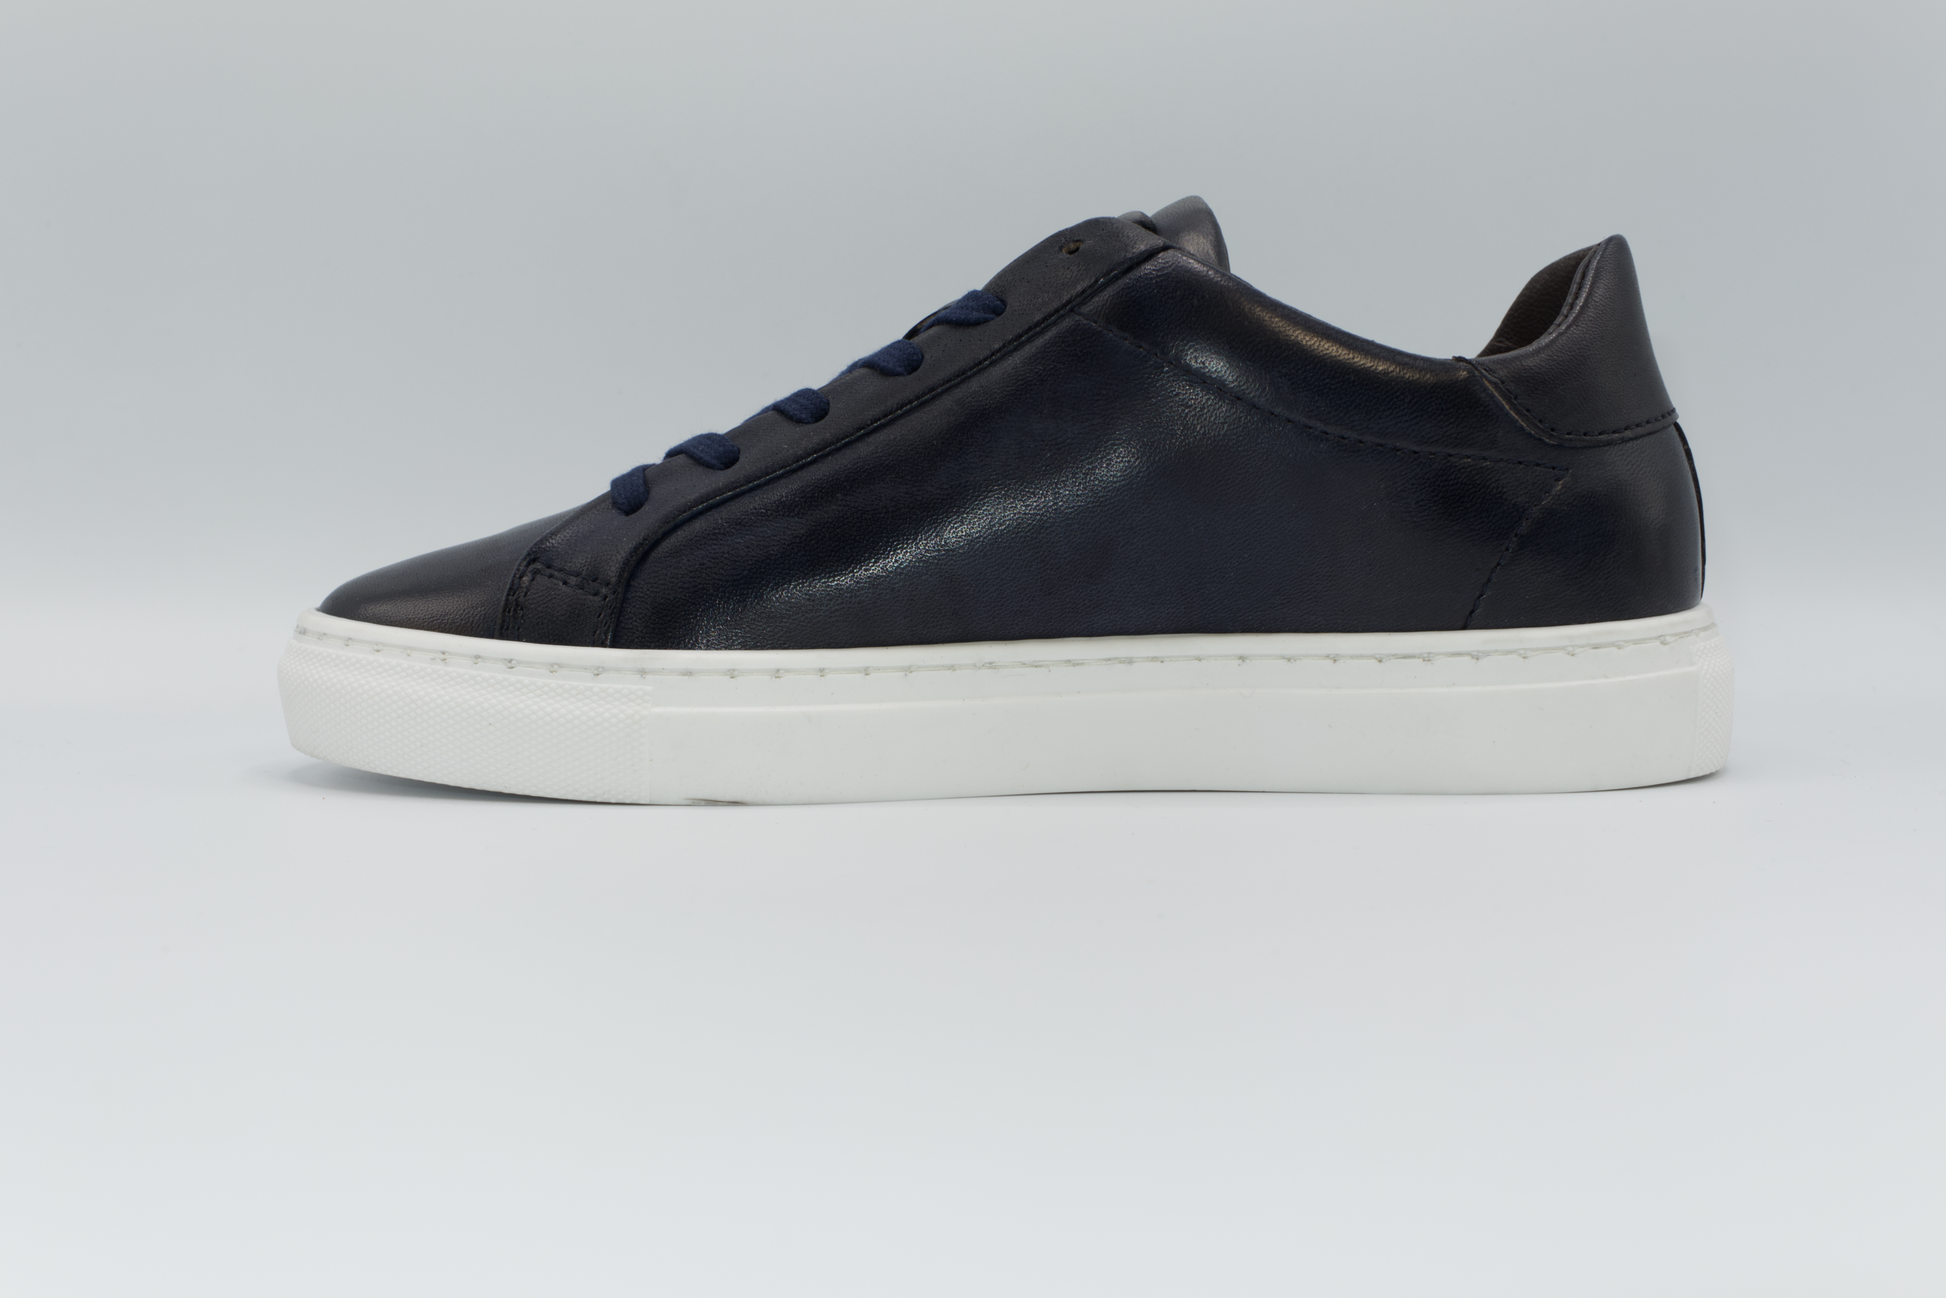 Shop Handmade Italian Leather Sneaker in Navy Blue or browse our range of hand-made Italian sneakers for men in leather or suede. We deliver to the USA and Canada & offer multiple payment plans as well as accept multiple safe & secure payment methods. Coraf02